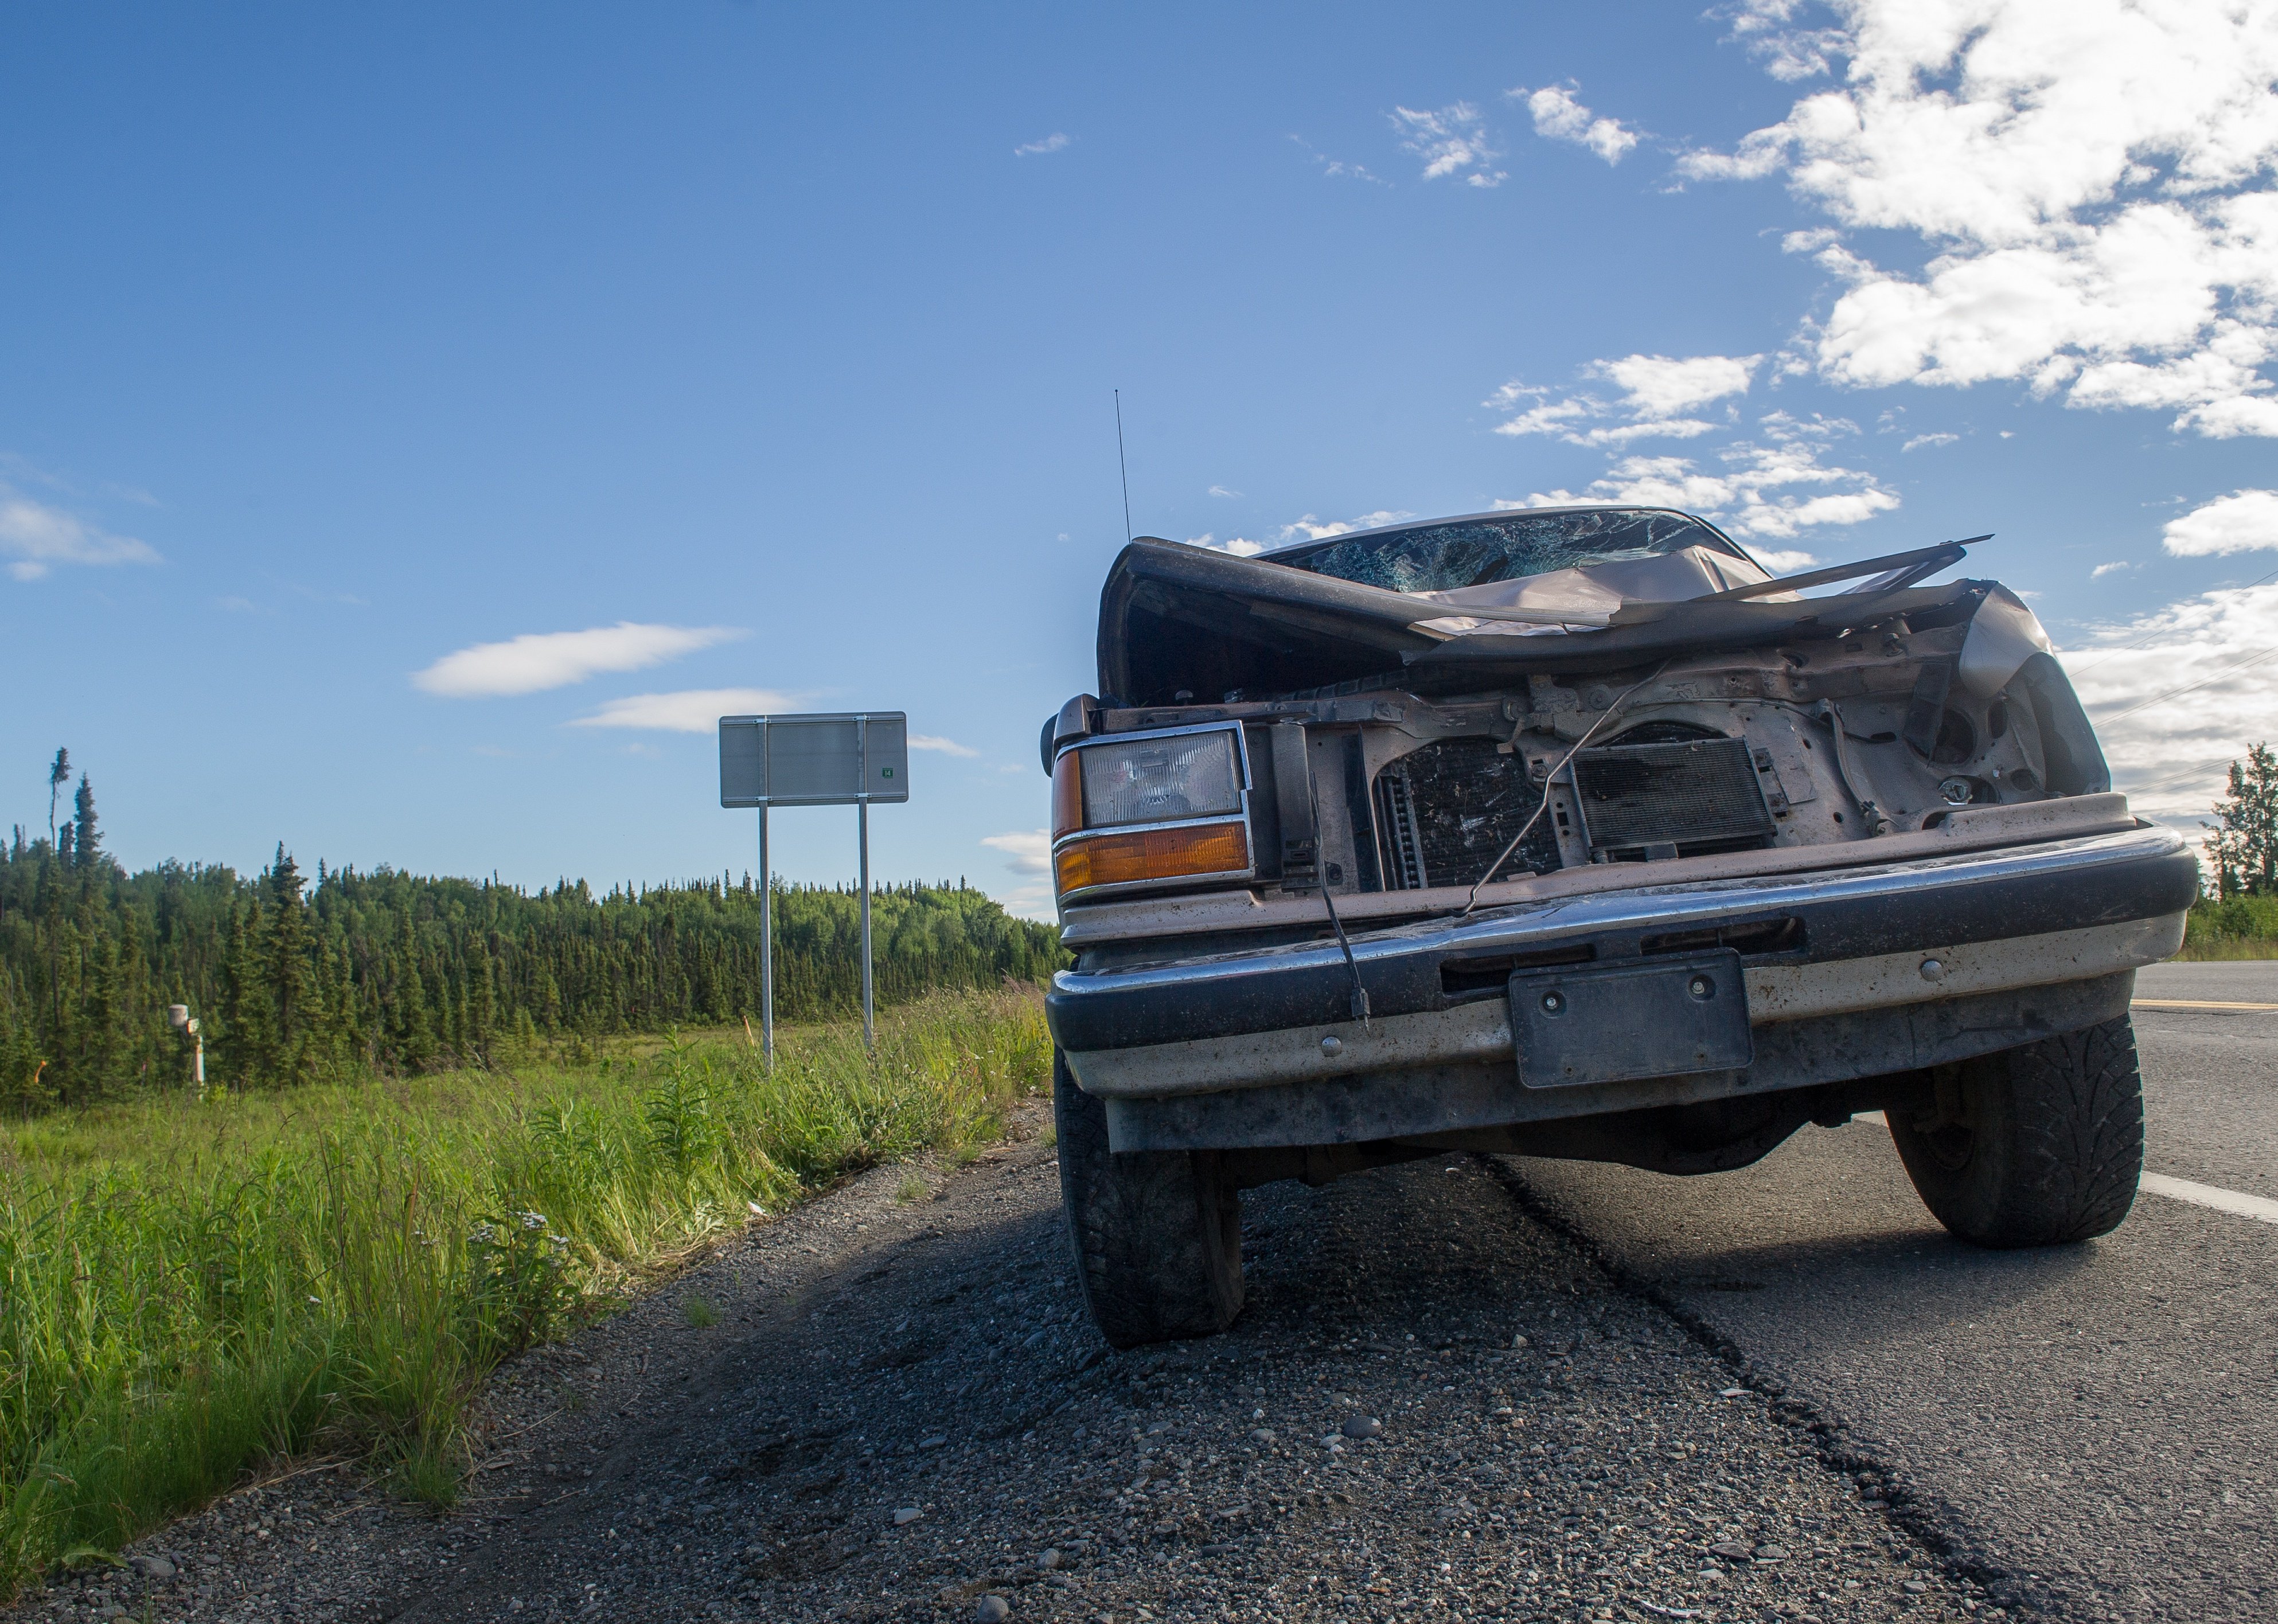 Wrecked car on the side of the road after collision in Alaska.